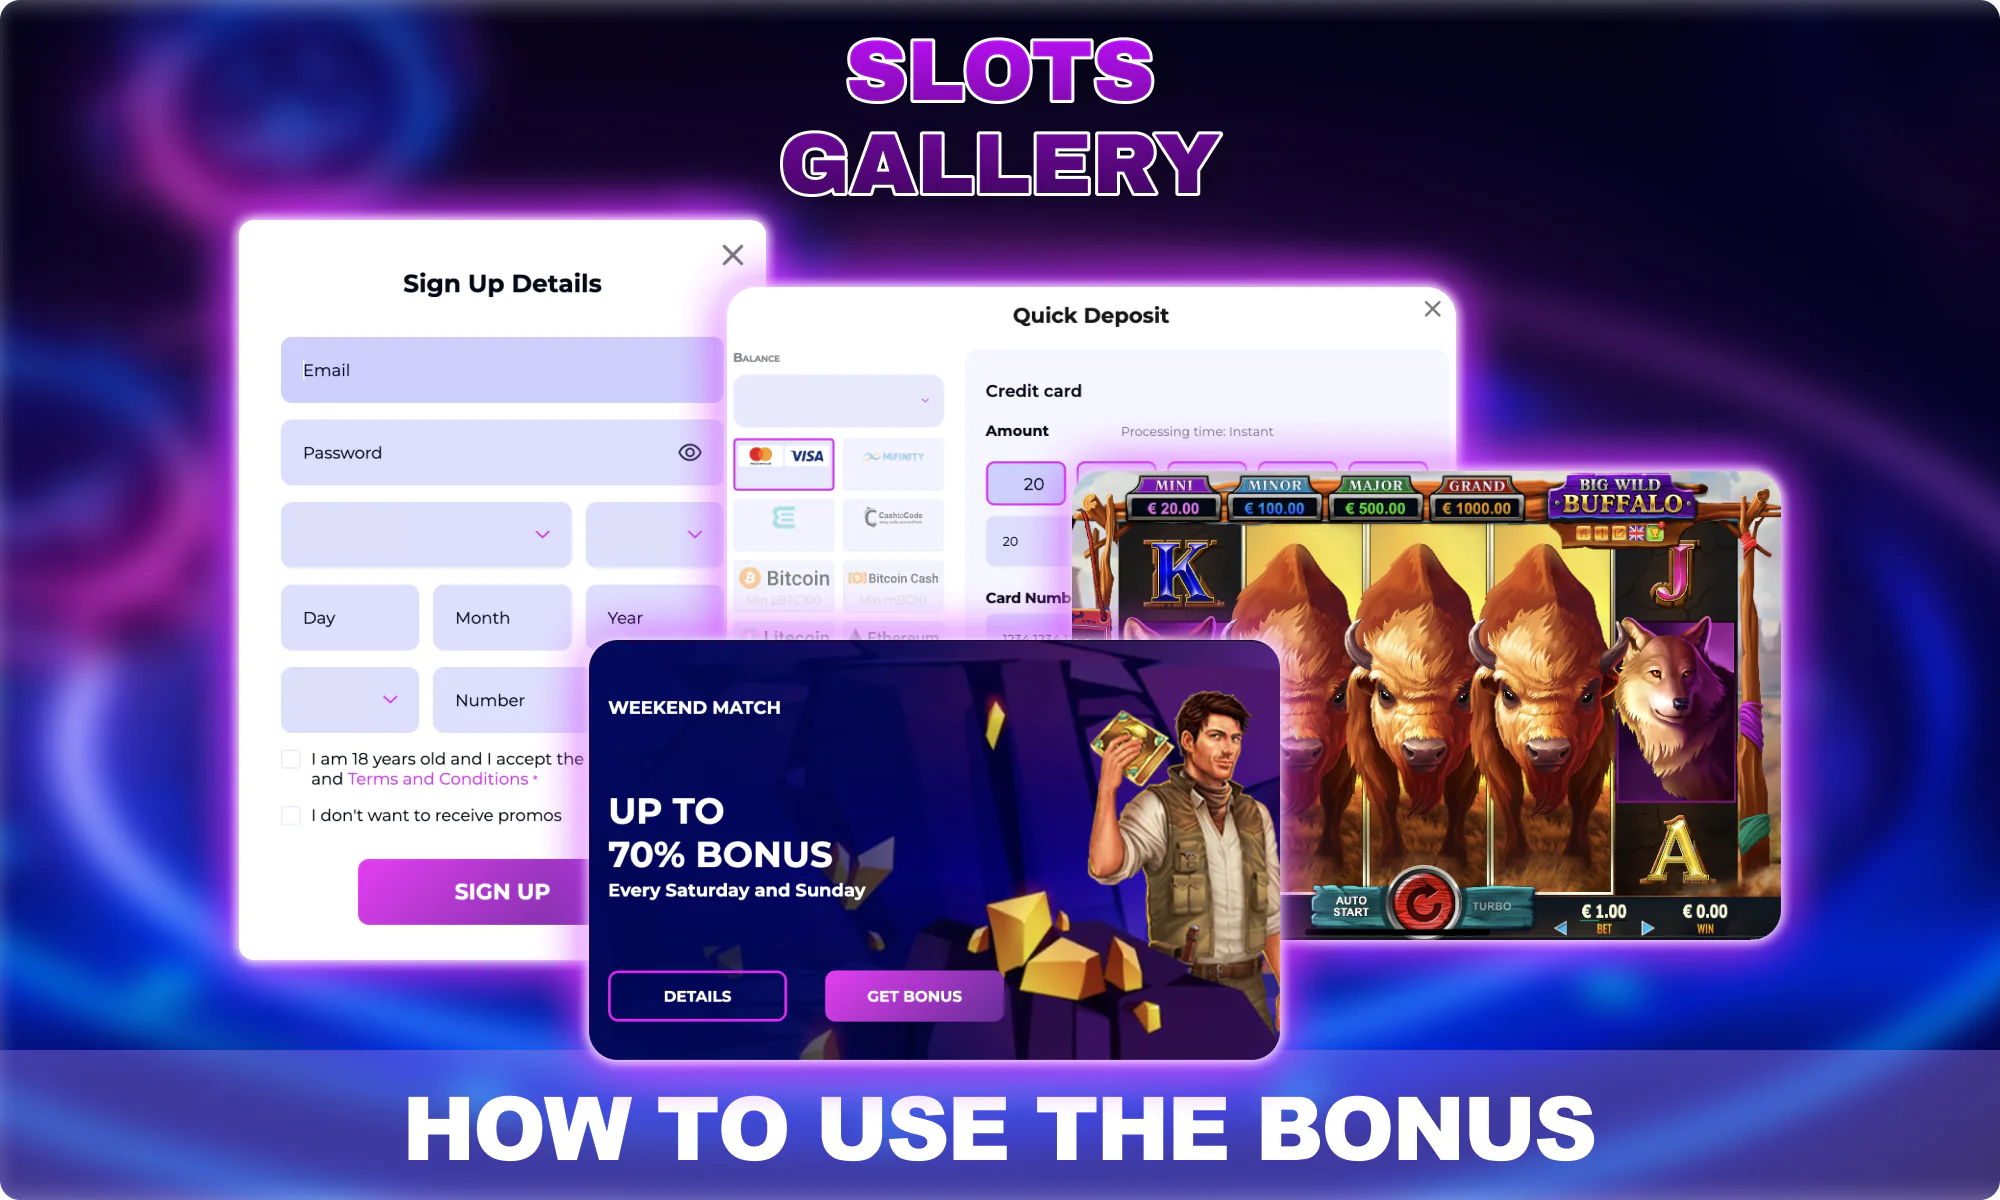 Bonuses at Slots Gallery and how to use them